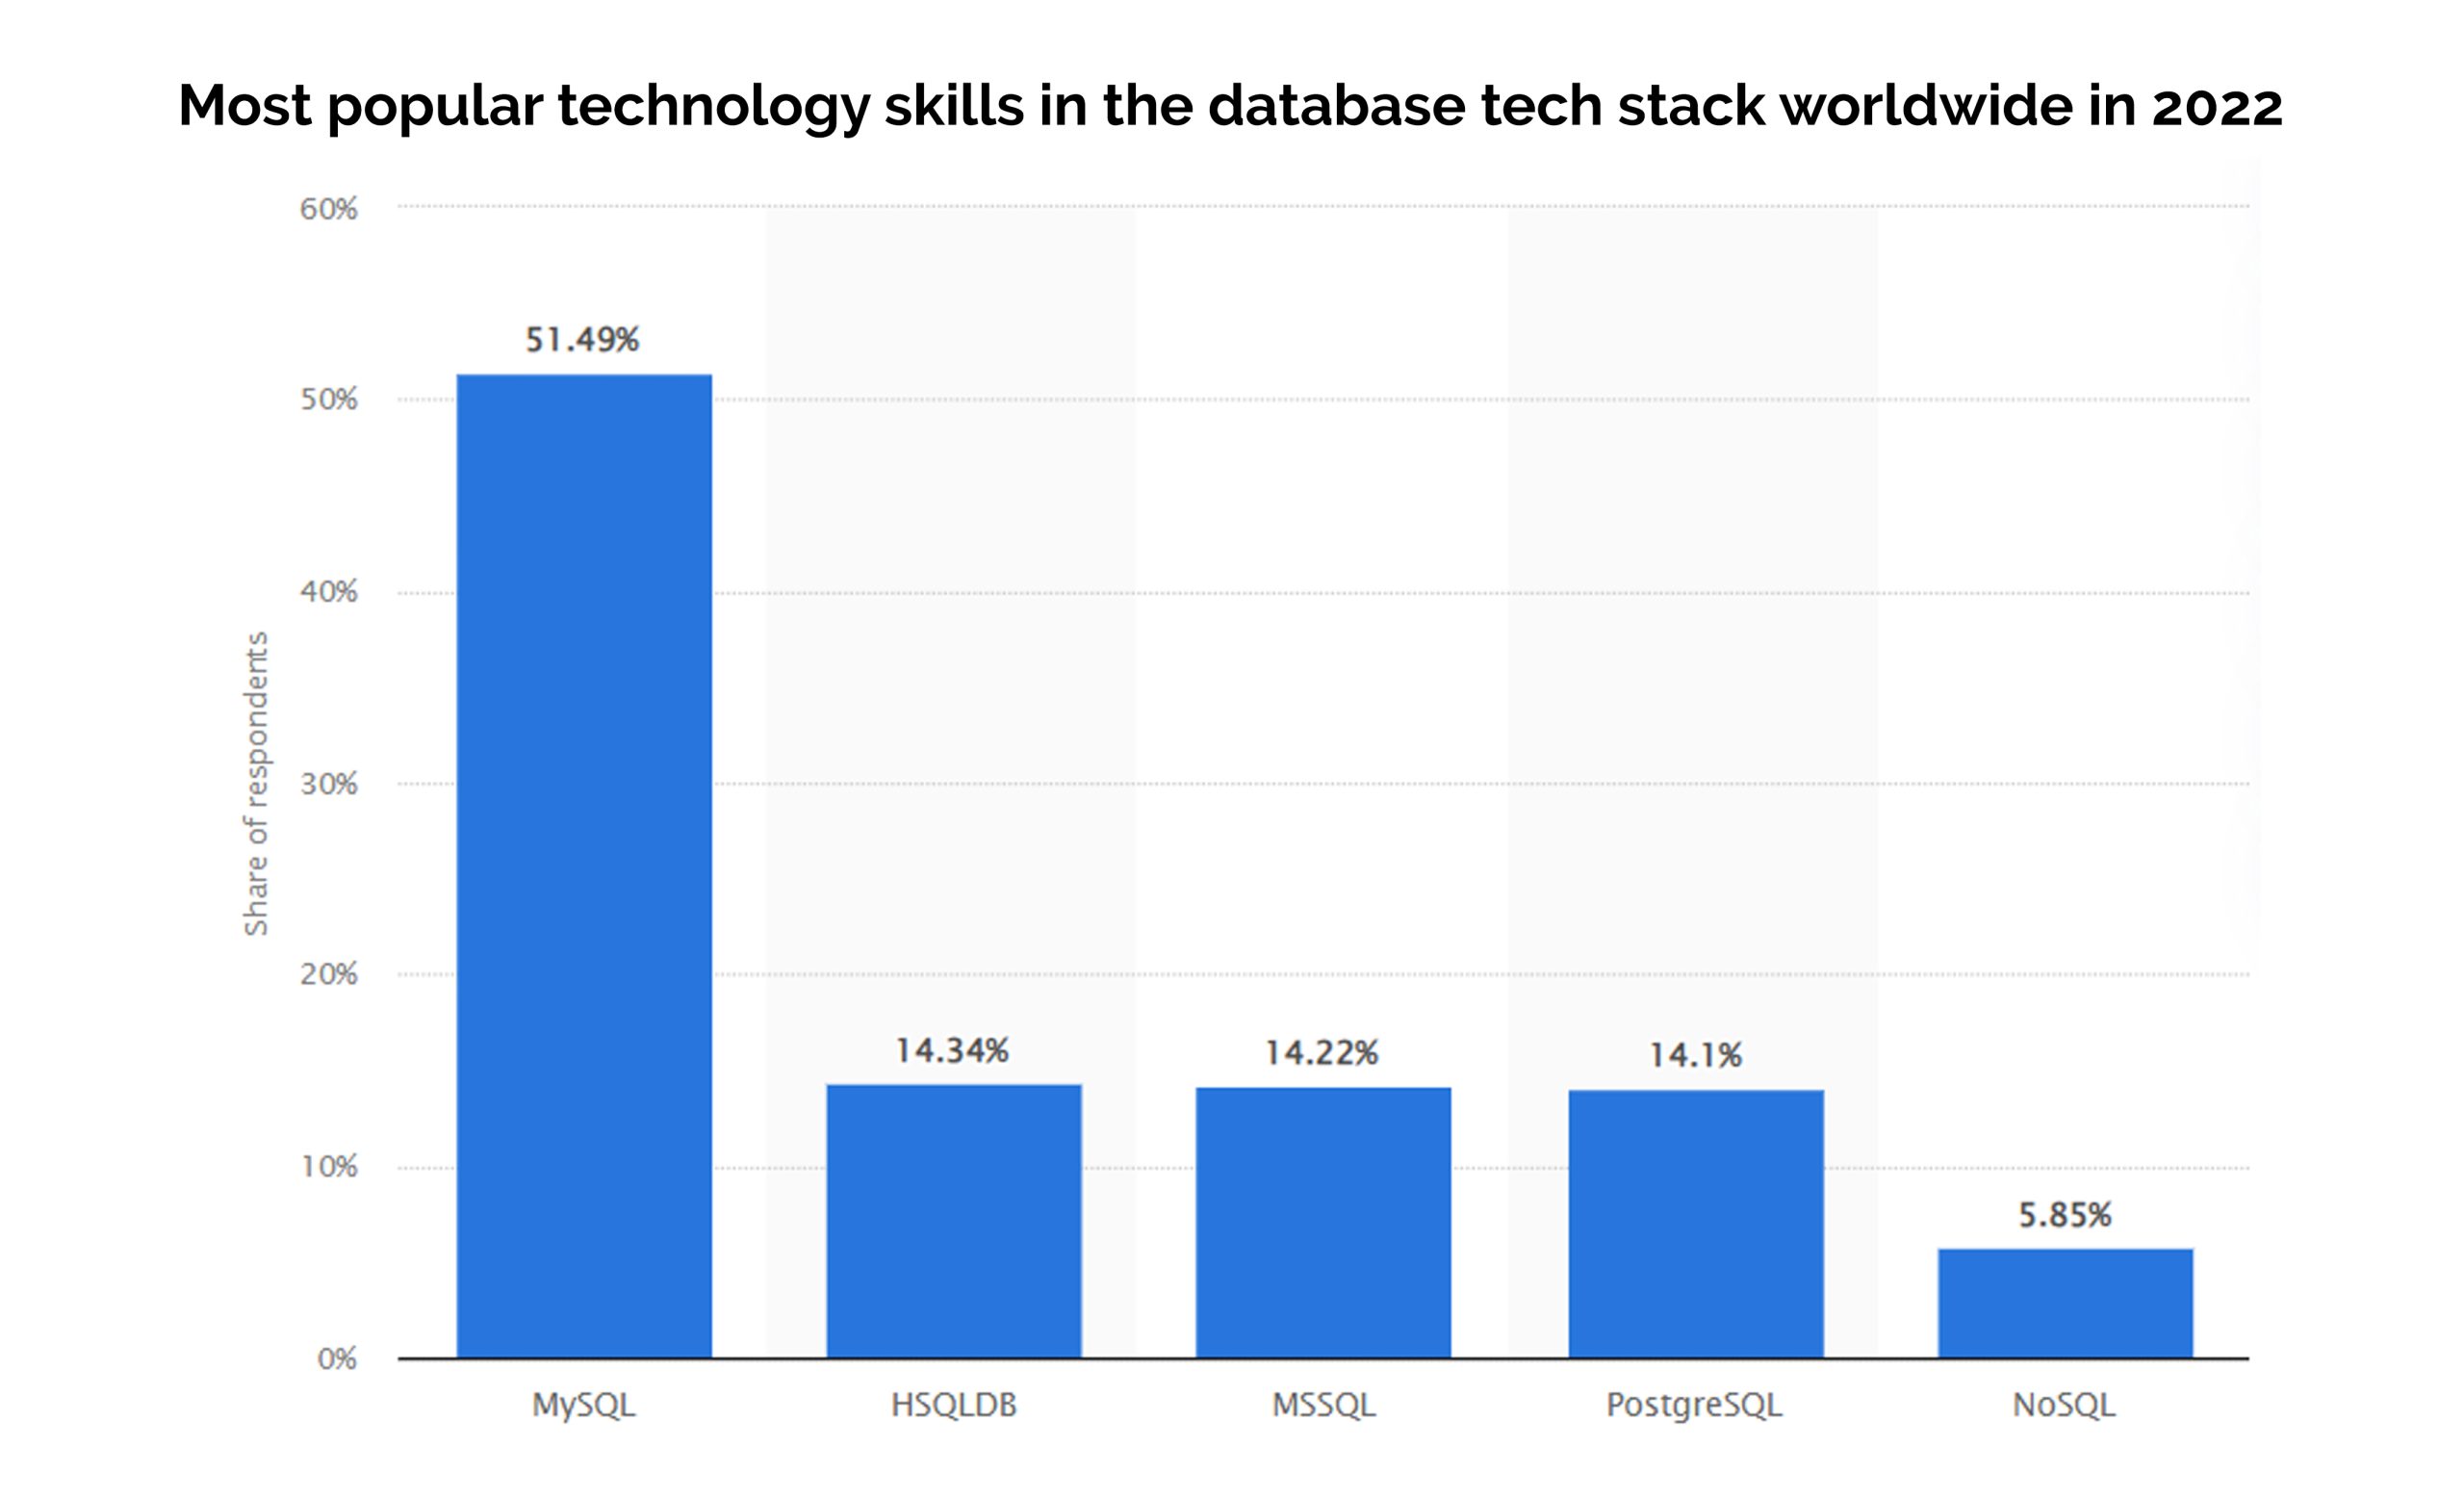 Most popular technology skills in the database tech stack worldwide in 2022